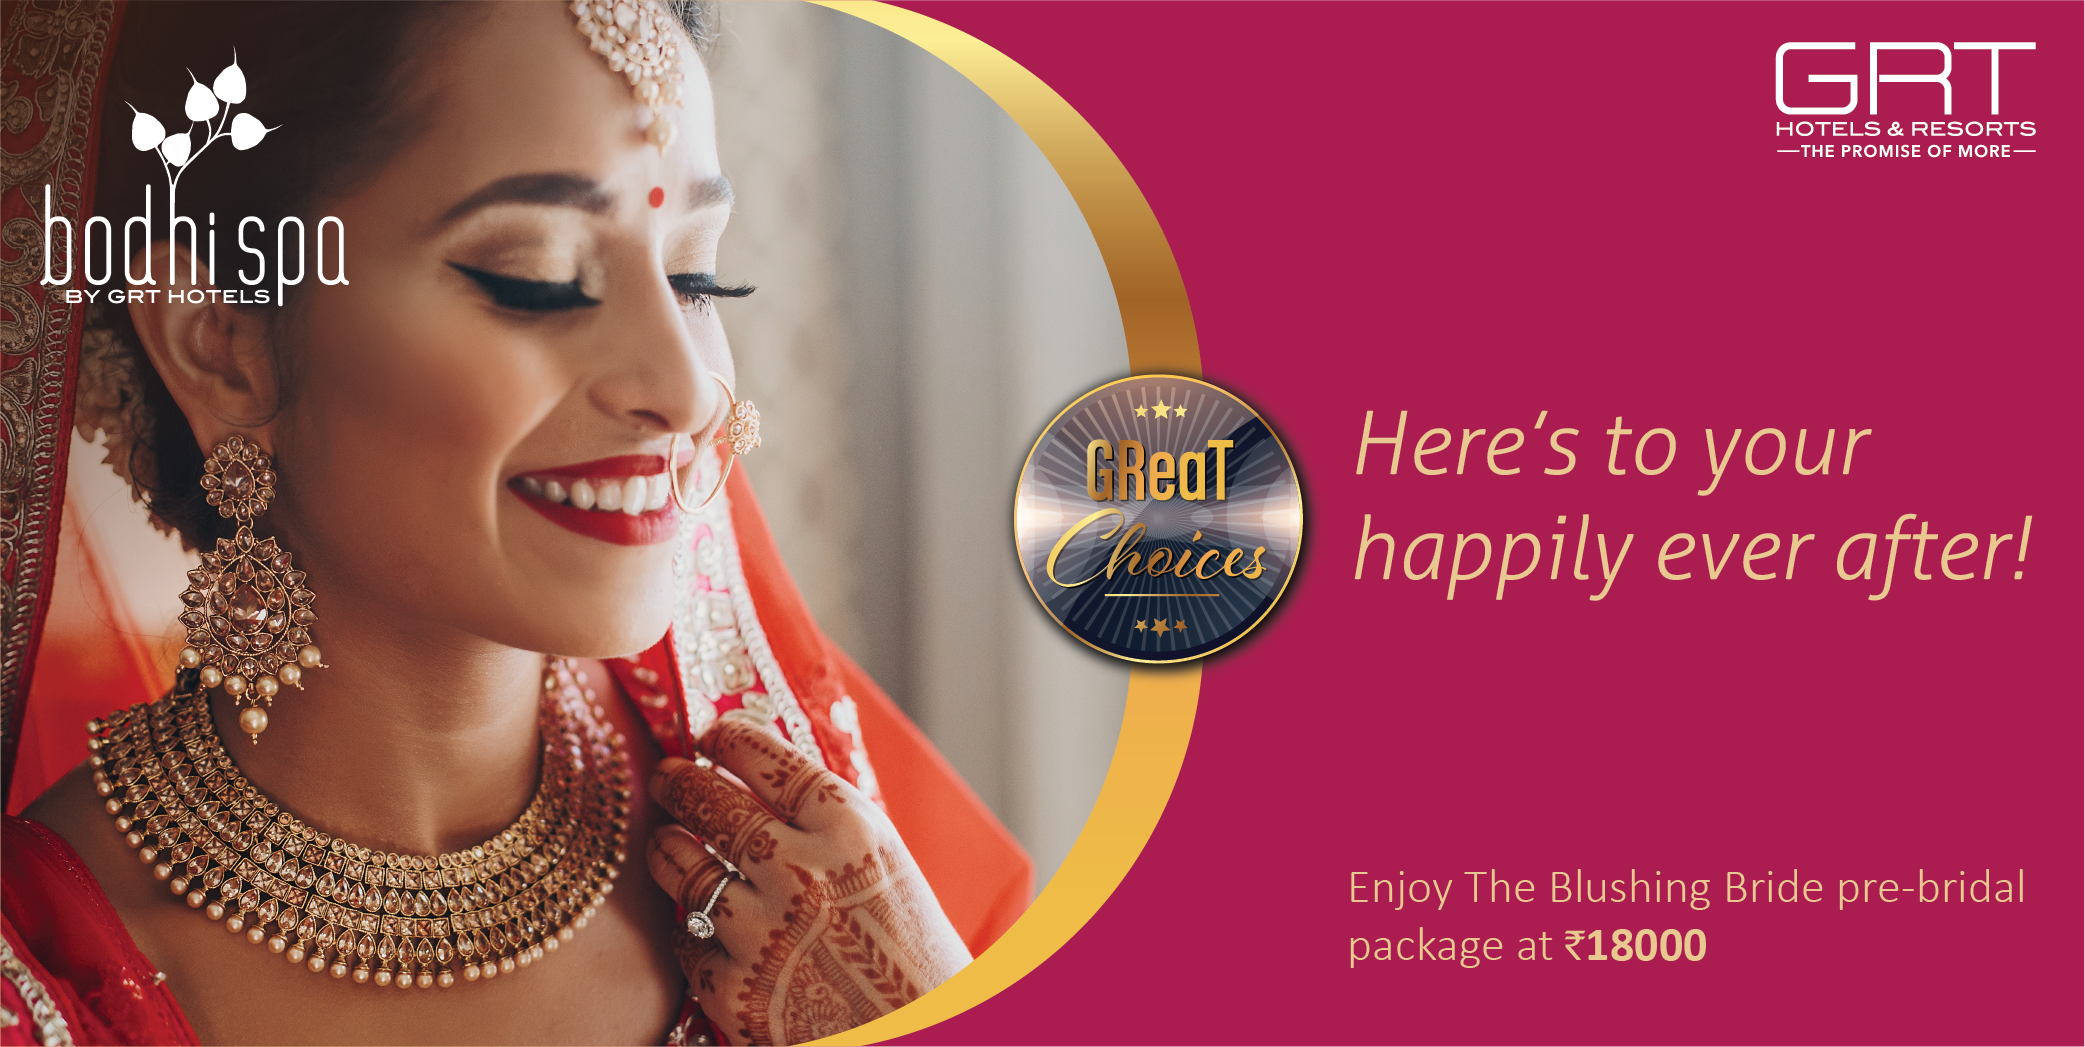 The Blushing Bride Pre Bridal Package